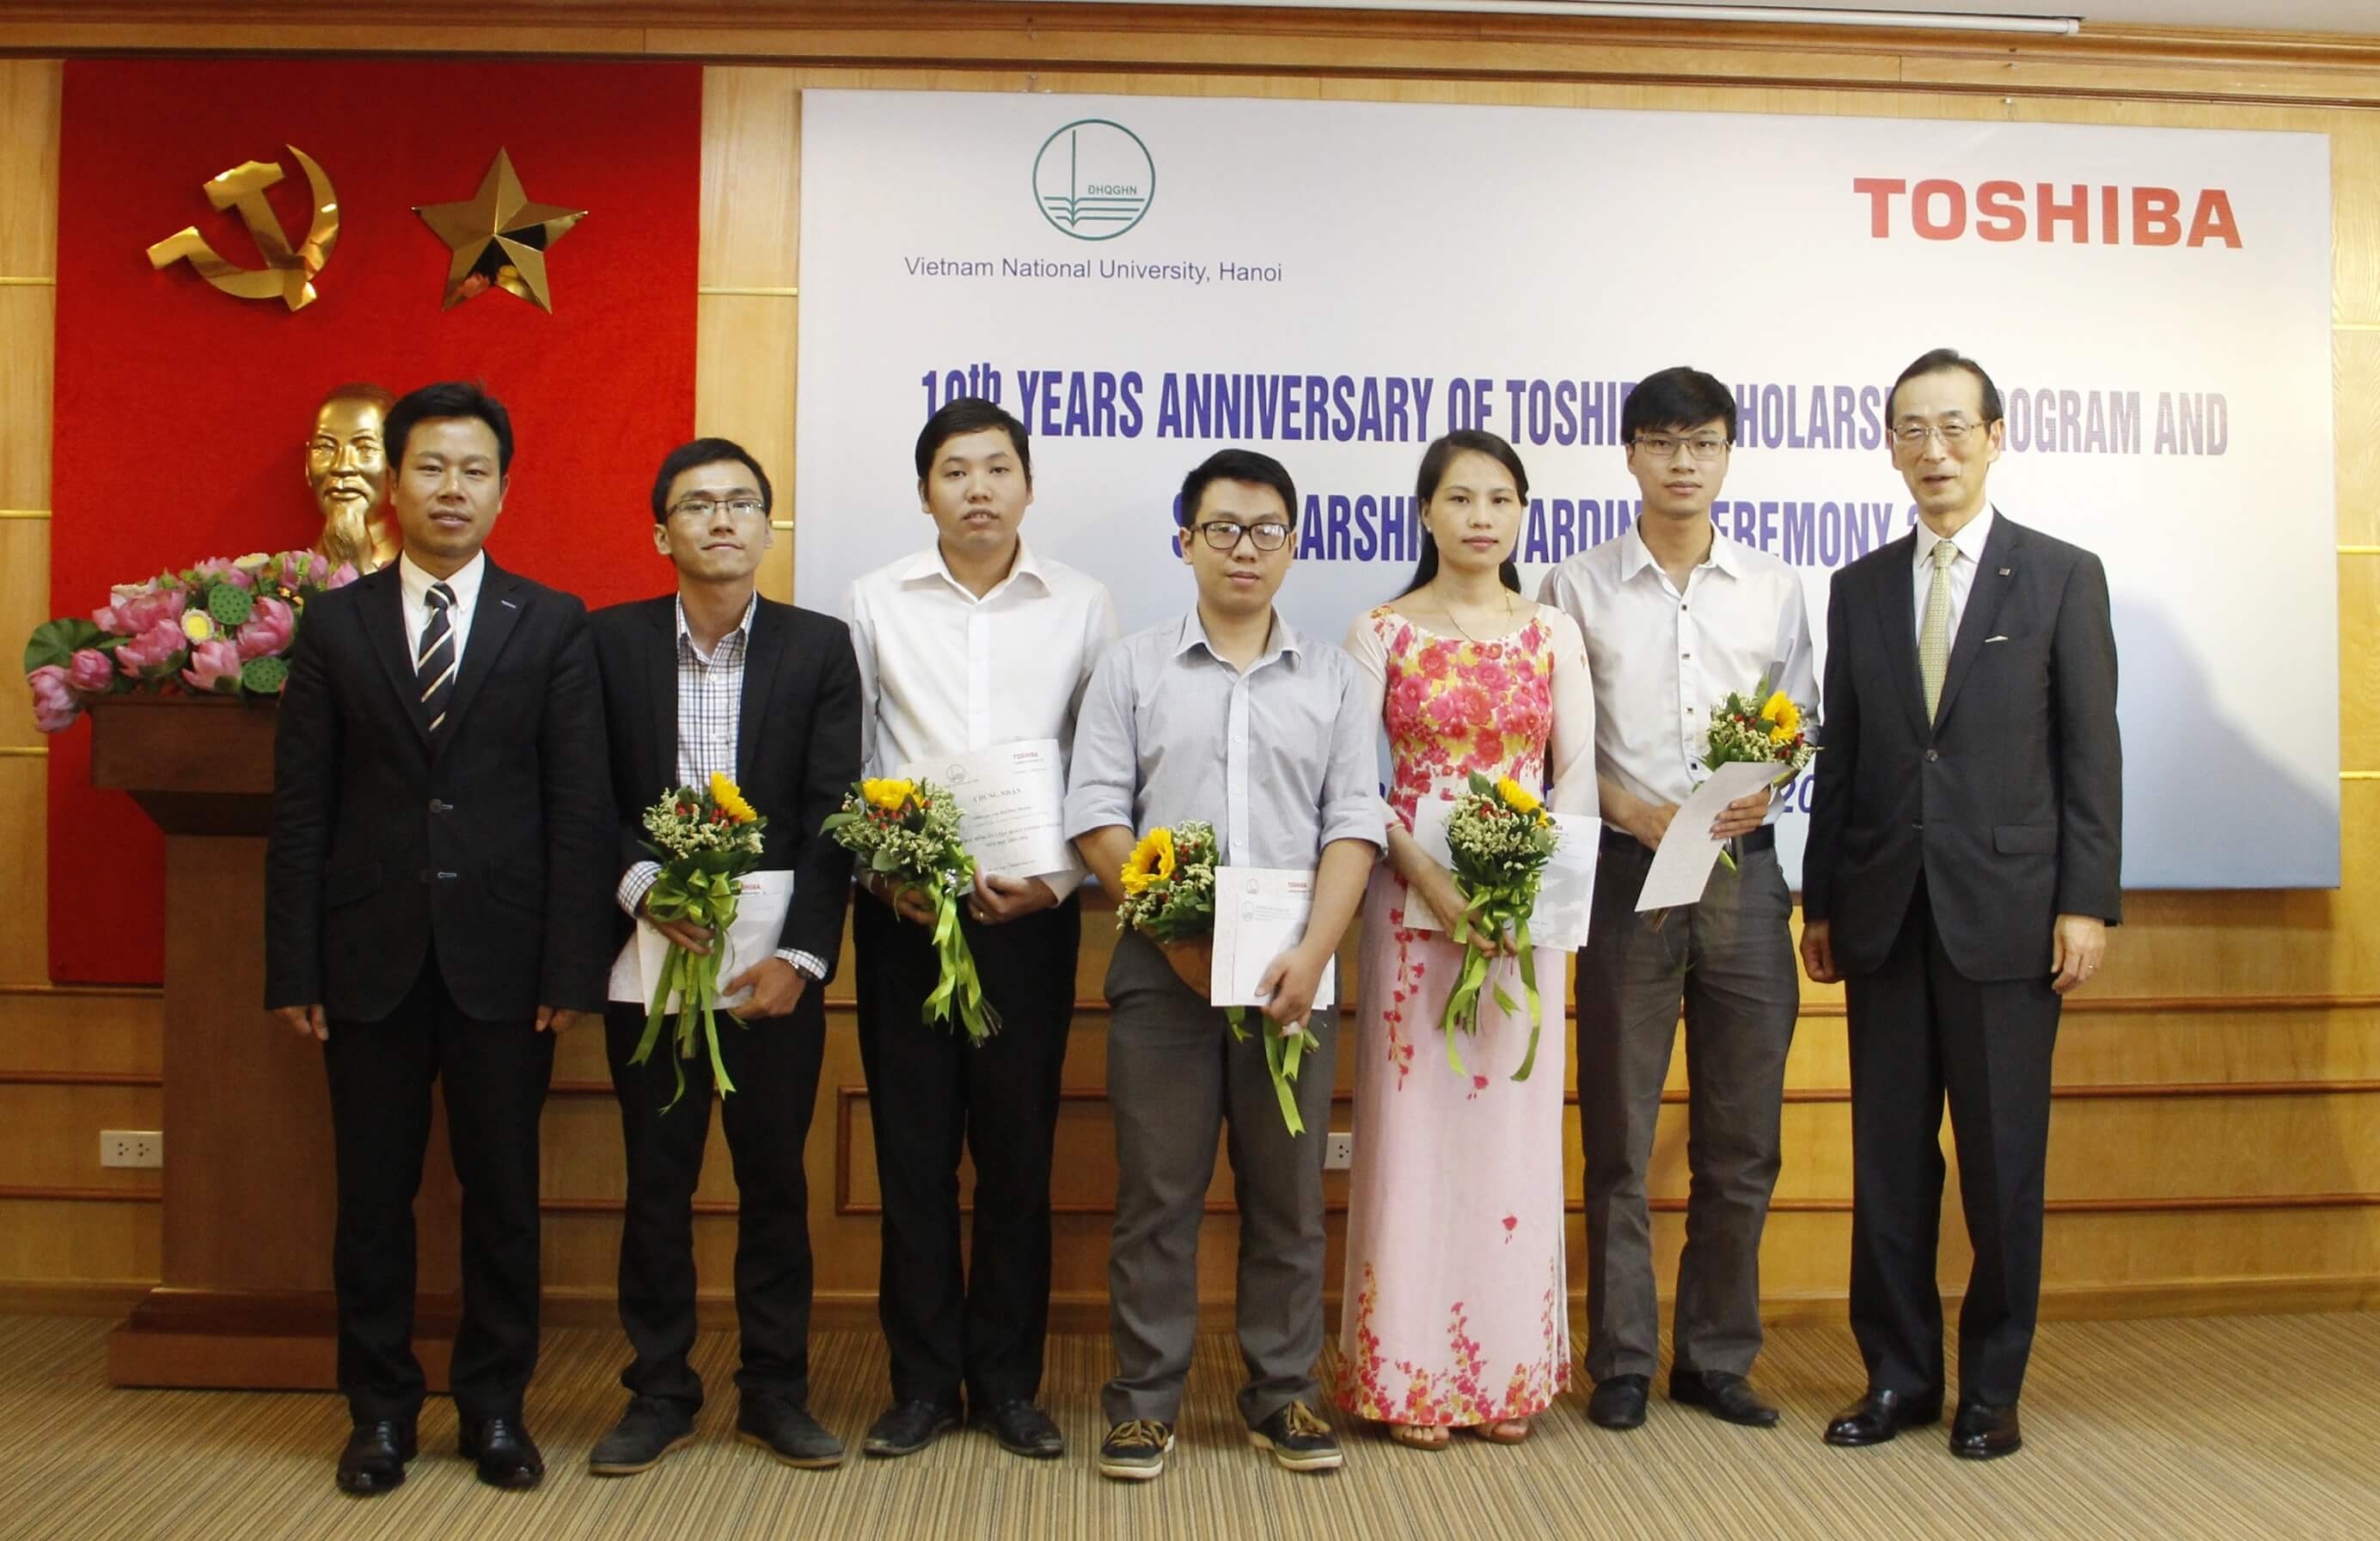 Dr. Naoto Nishida, Corporate Executive Vice President, Toshiba Corporation (far right) and Prof. Dr. Le Quan, Vice President of Vietnam National University, Hanoi, (far left) together with recipients of the Toshiba scholarship awards 